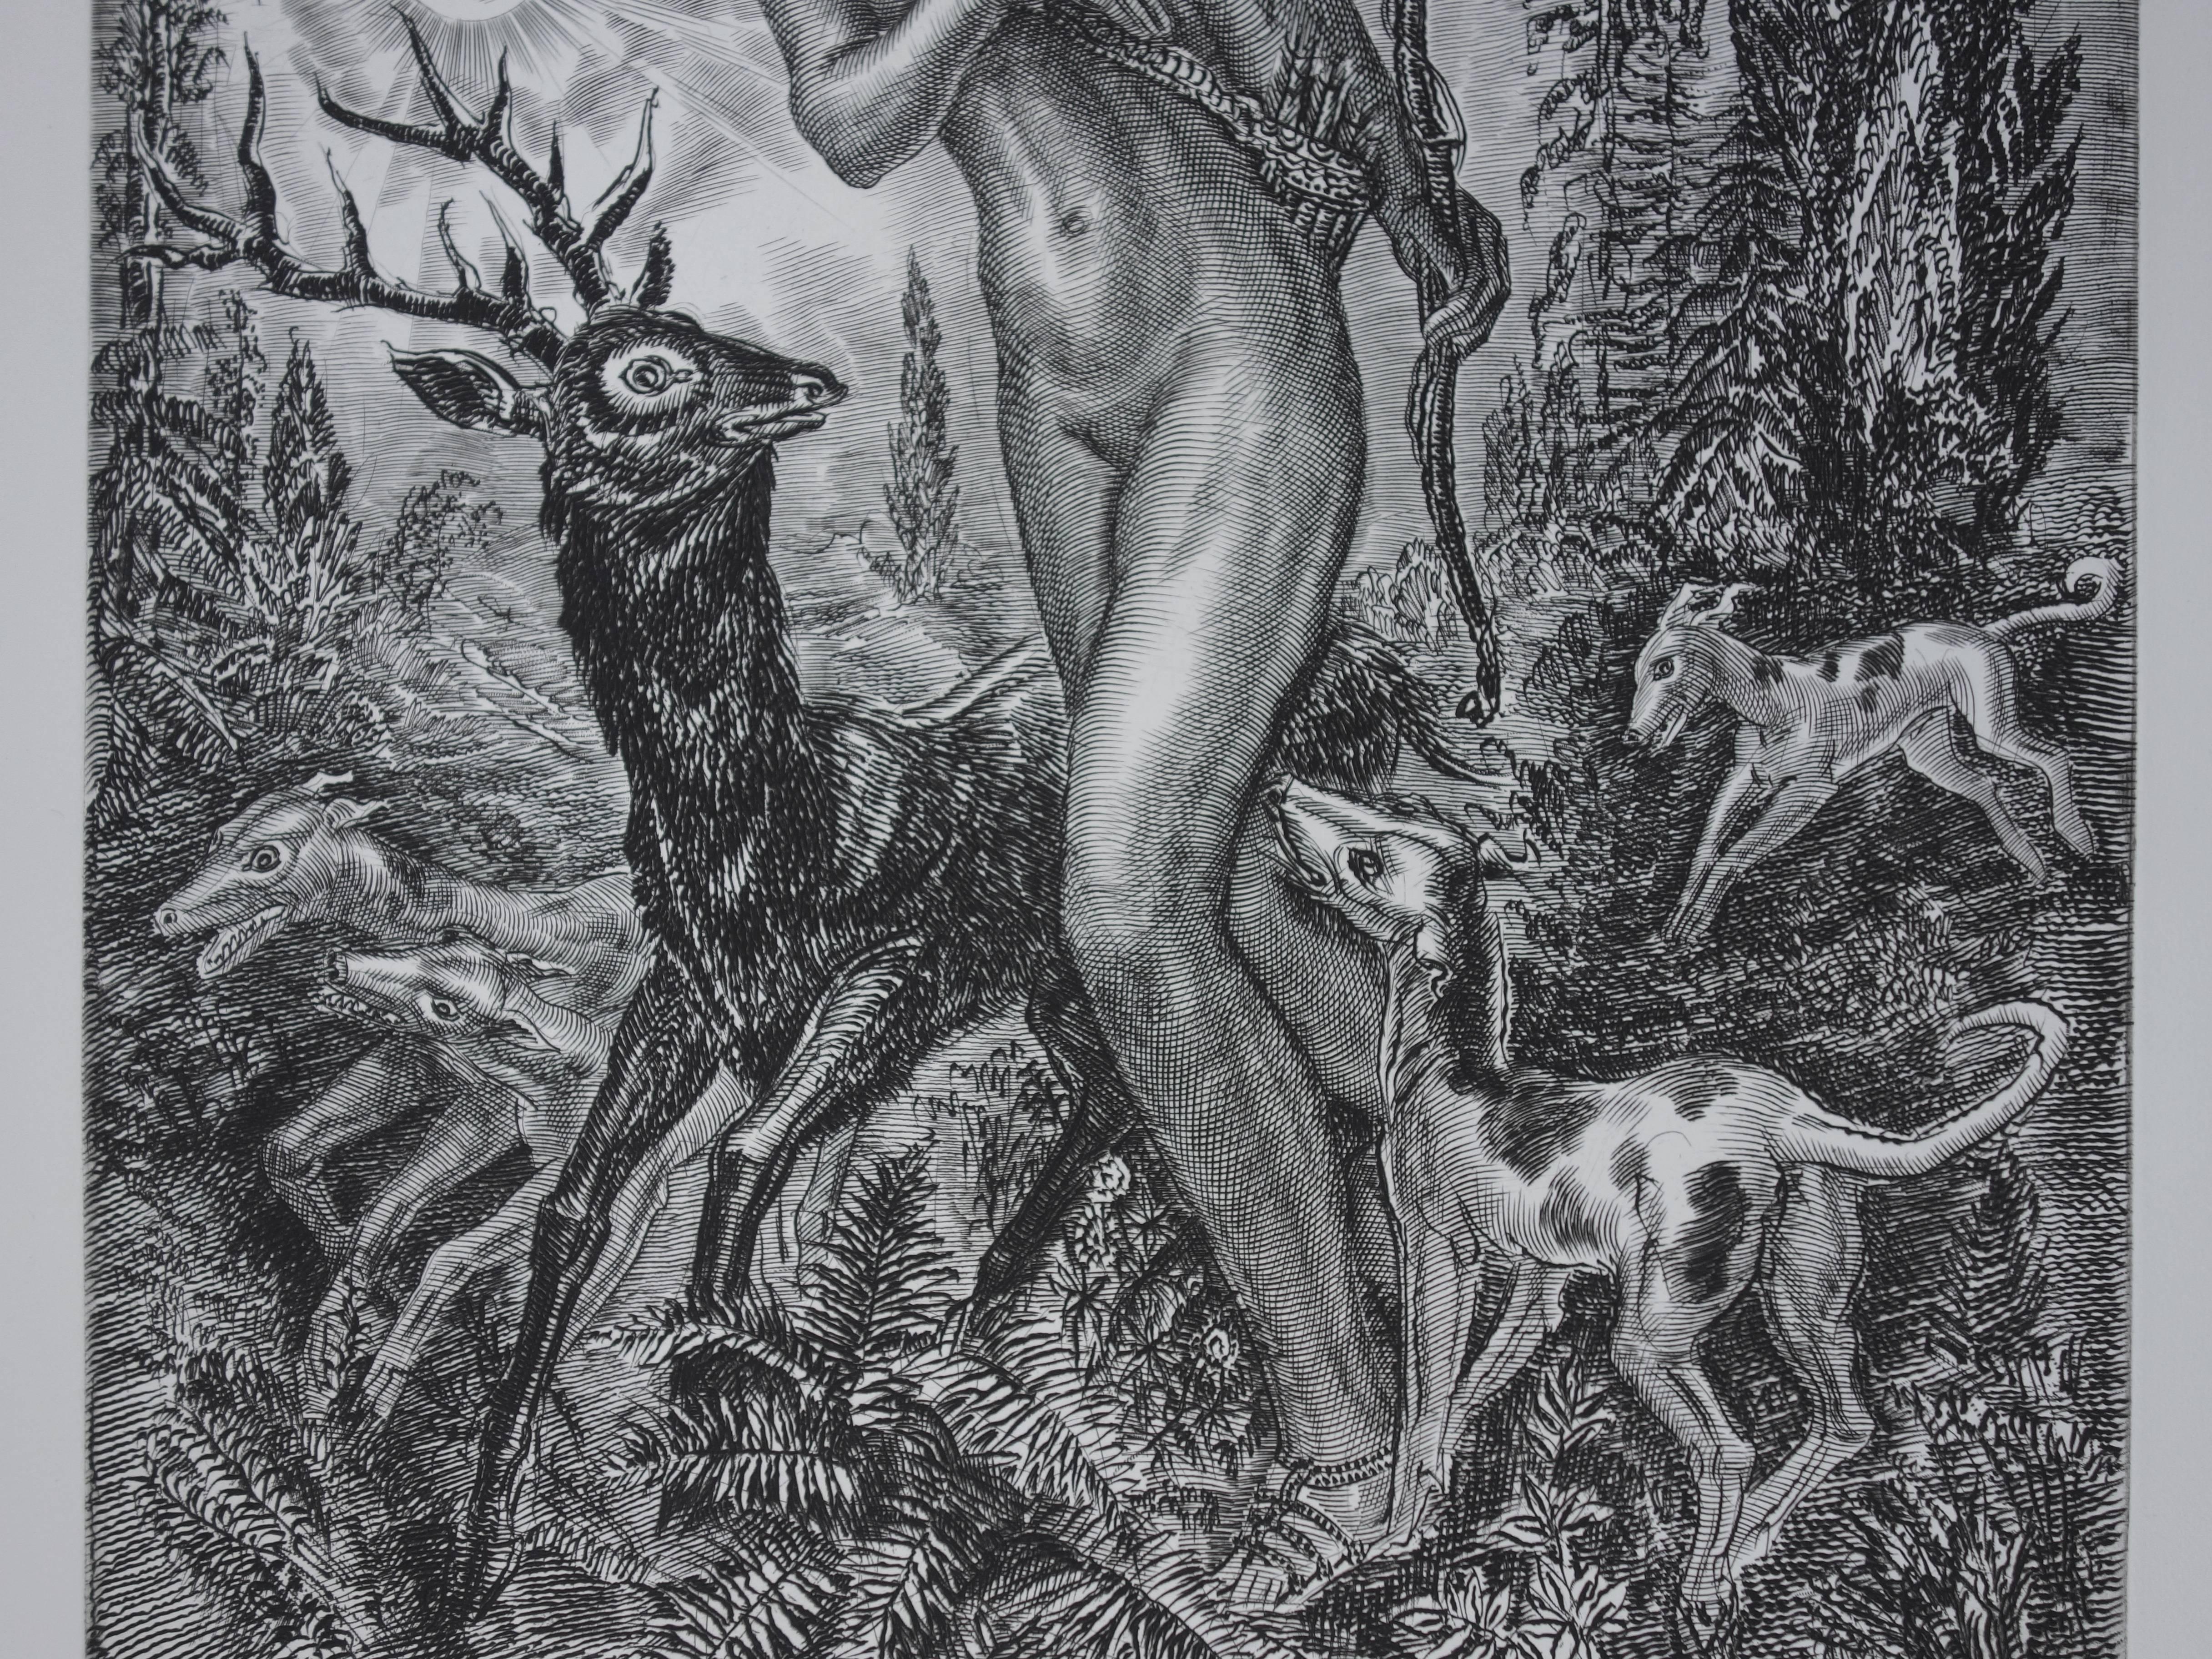 Albert DECARIS
October : Diane the Huntress

Original etching
Signed in pencil
Exceptional copy bearing n° 1/100
Titled Janvier (January)
On vellum 66 x 50 cm (c. 26 x 20in)

Excellent condition